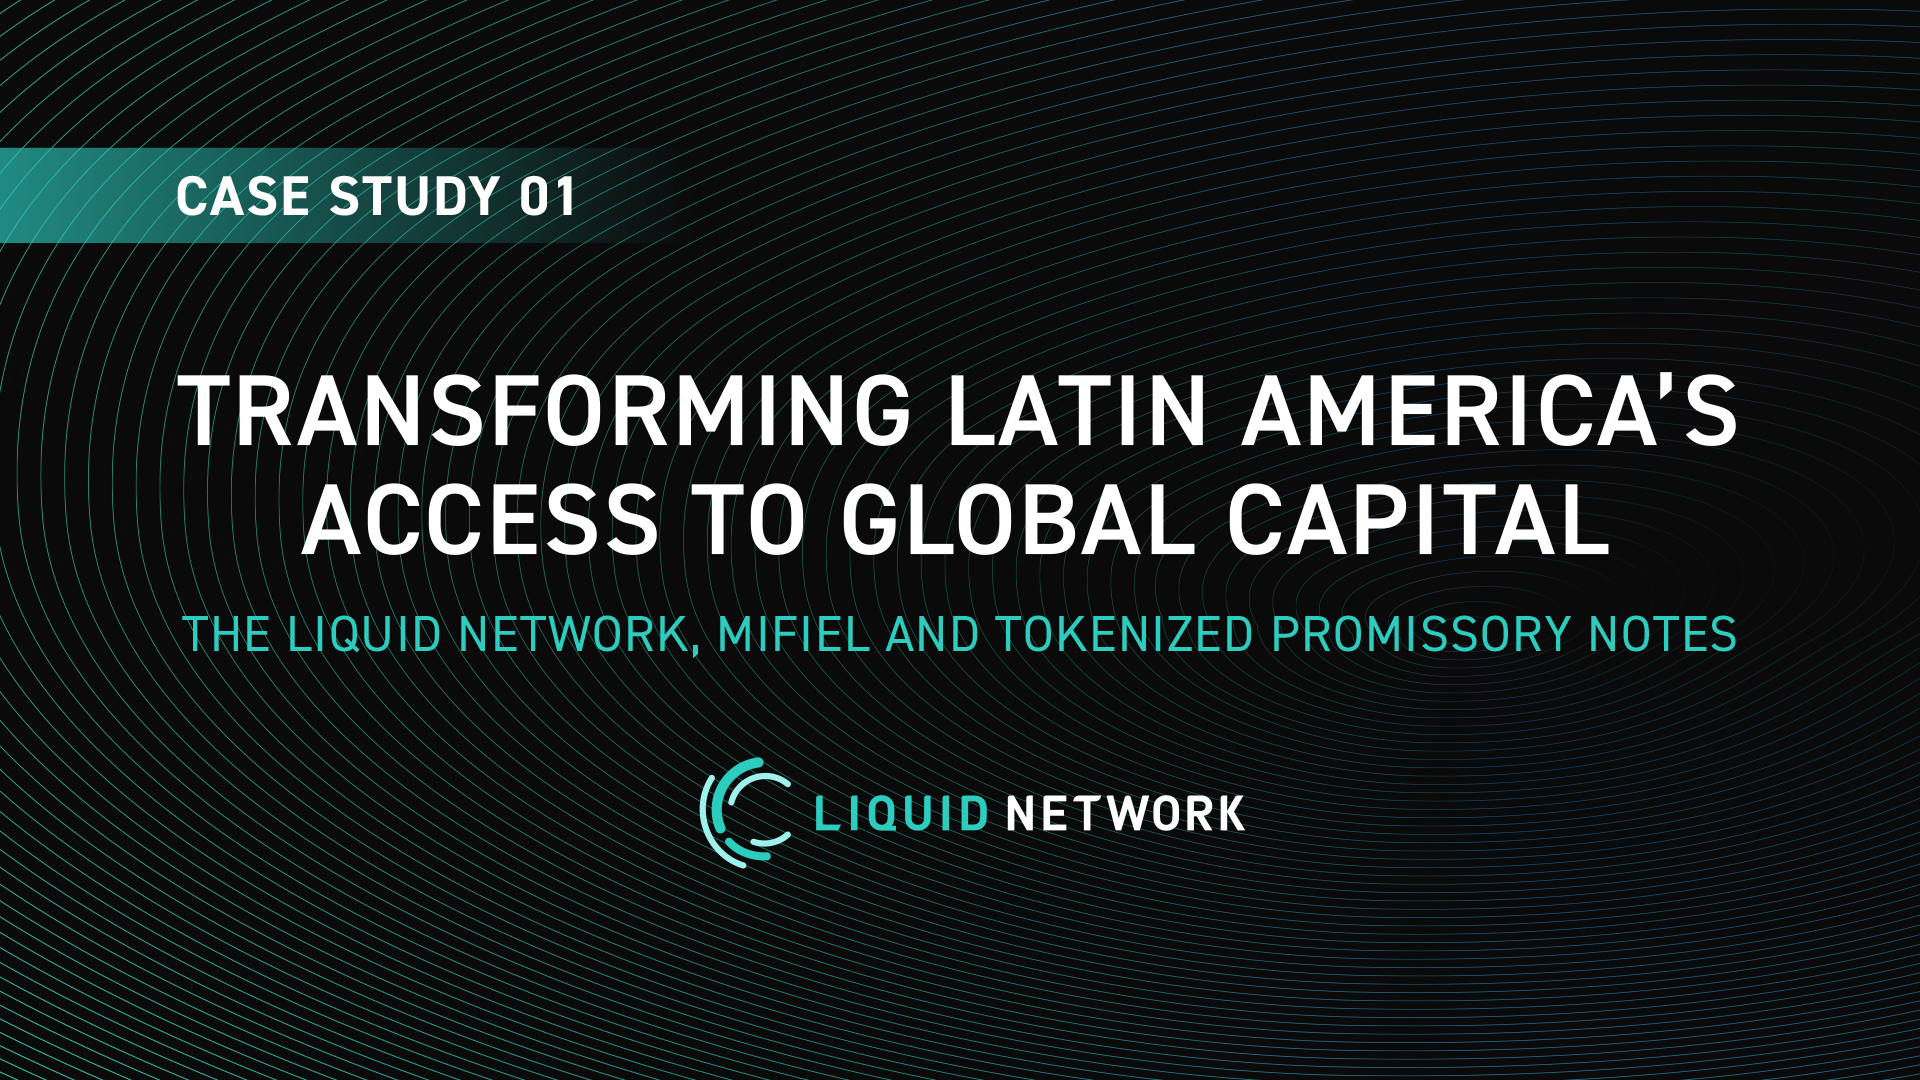 Transforming Latin America’s Access to Global Capital